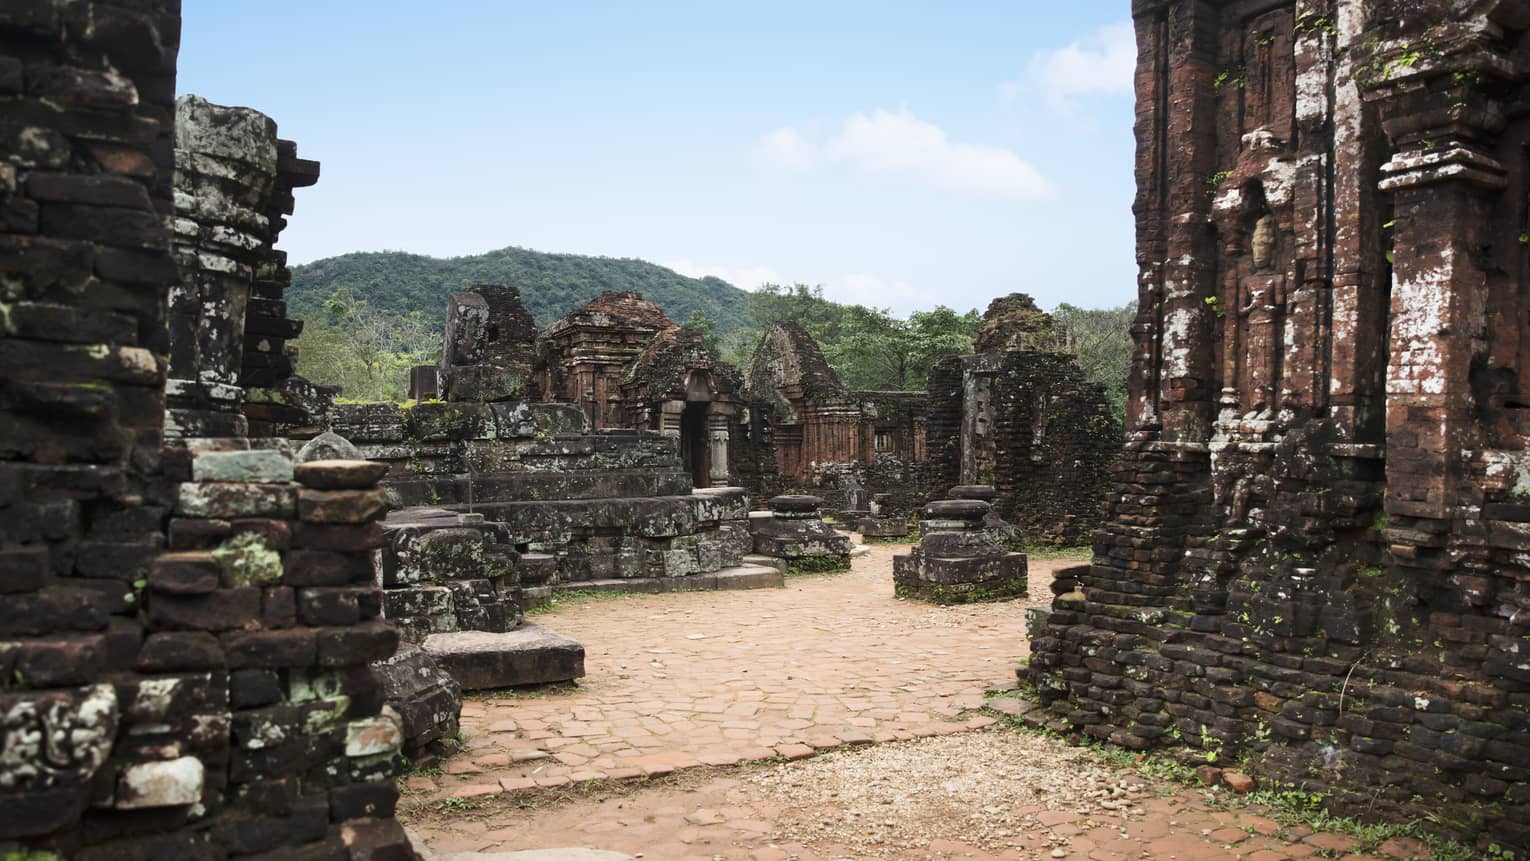 A image of the My Son ruins in The Nam Hai, Hoi An, Vietnam